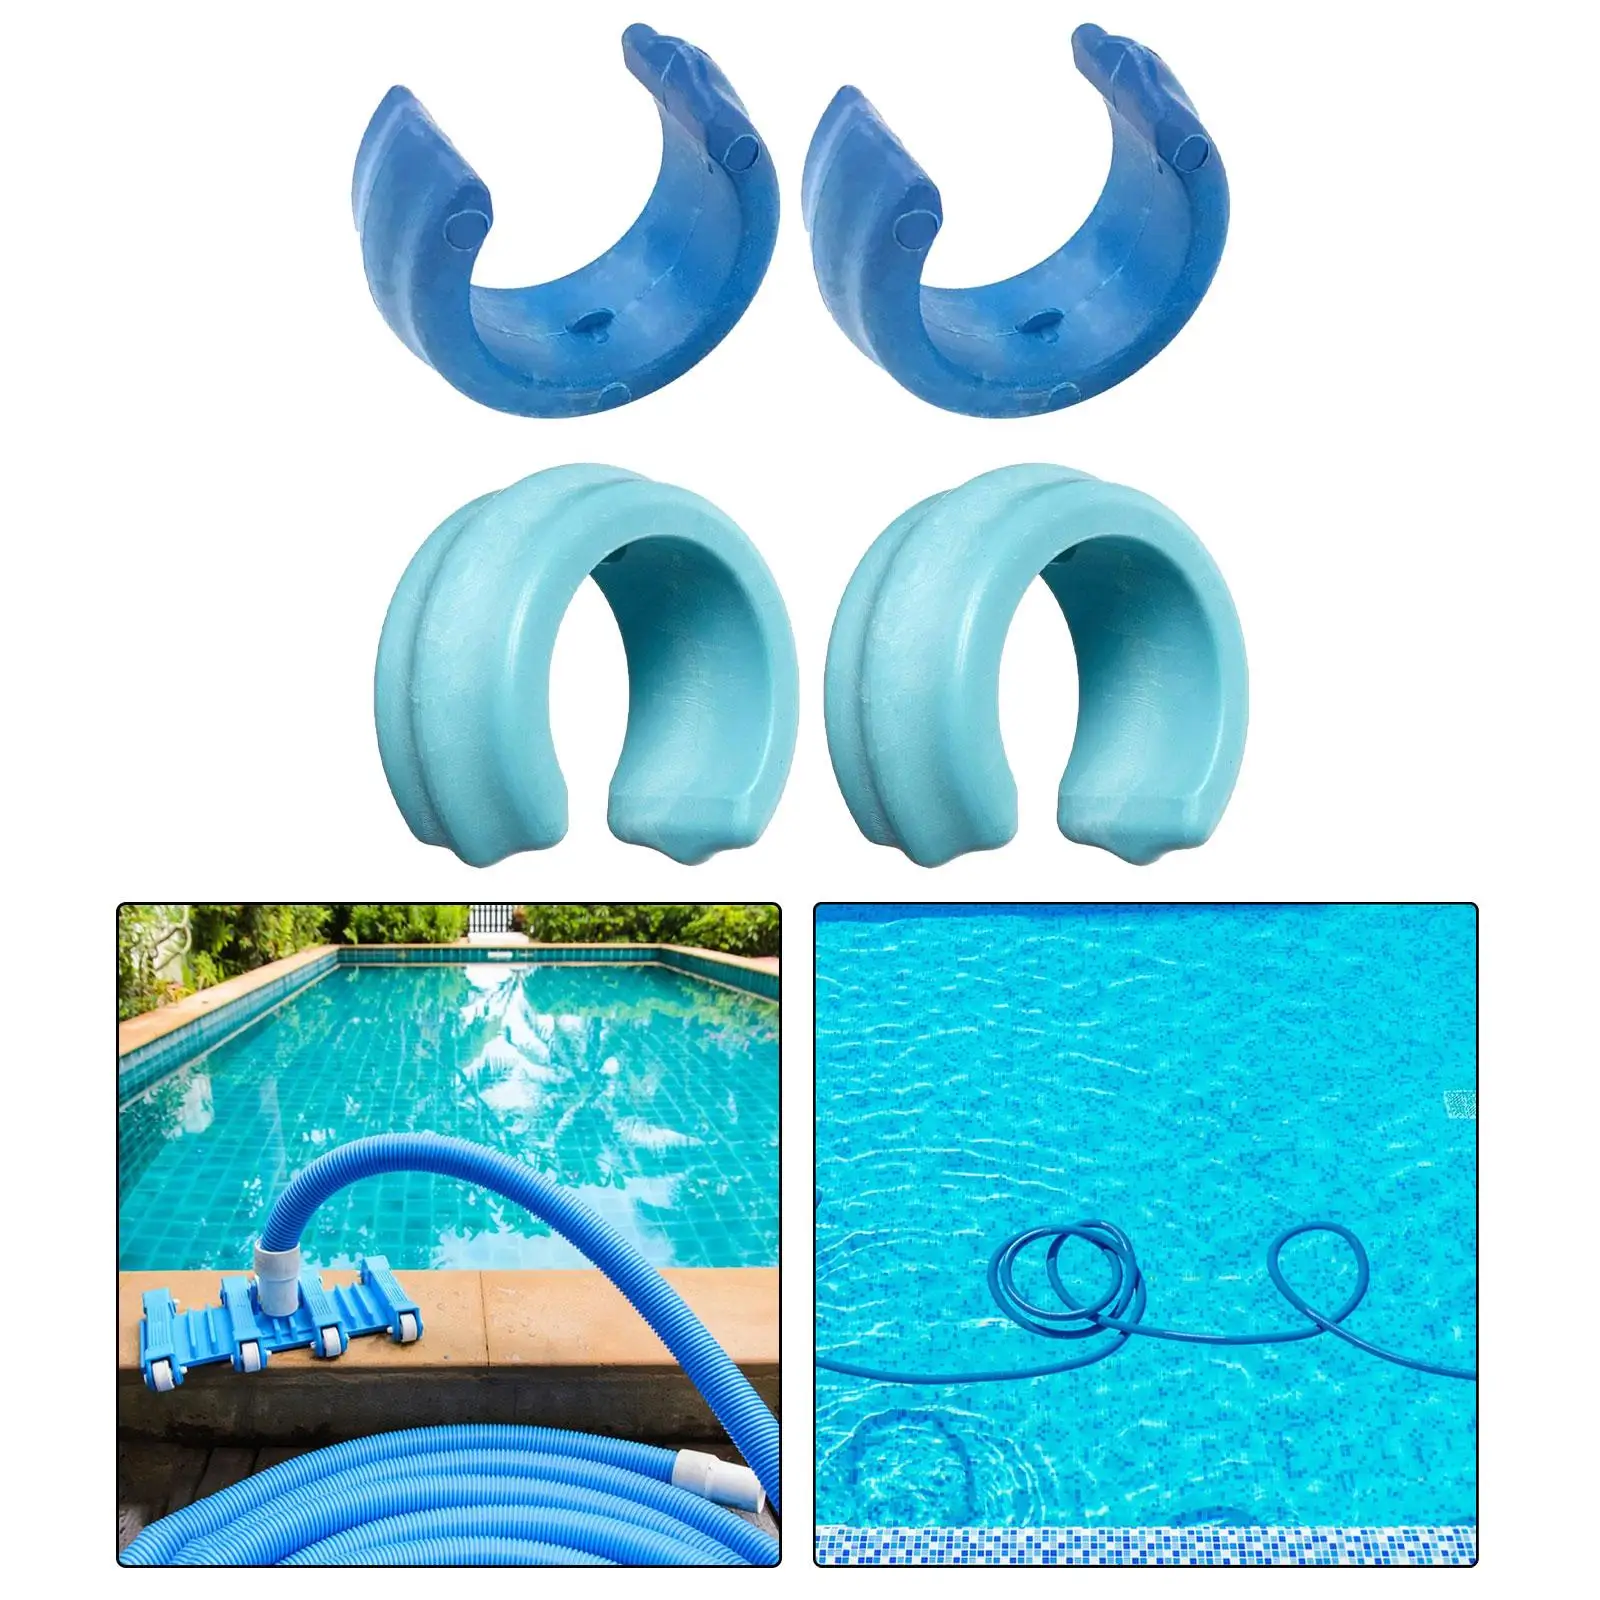 2x Automatic Pool Hose Weight Durable Material Practical Swimming Pool Accessories for x70105 W83247 Pool Cleaning Tools Accs